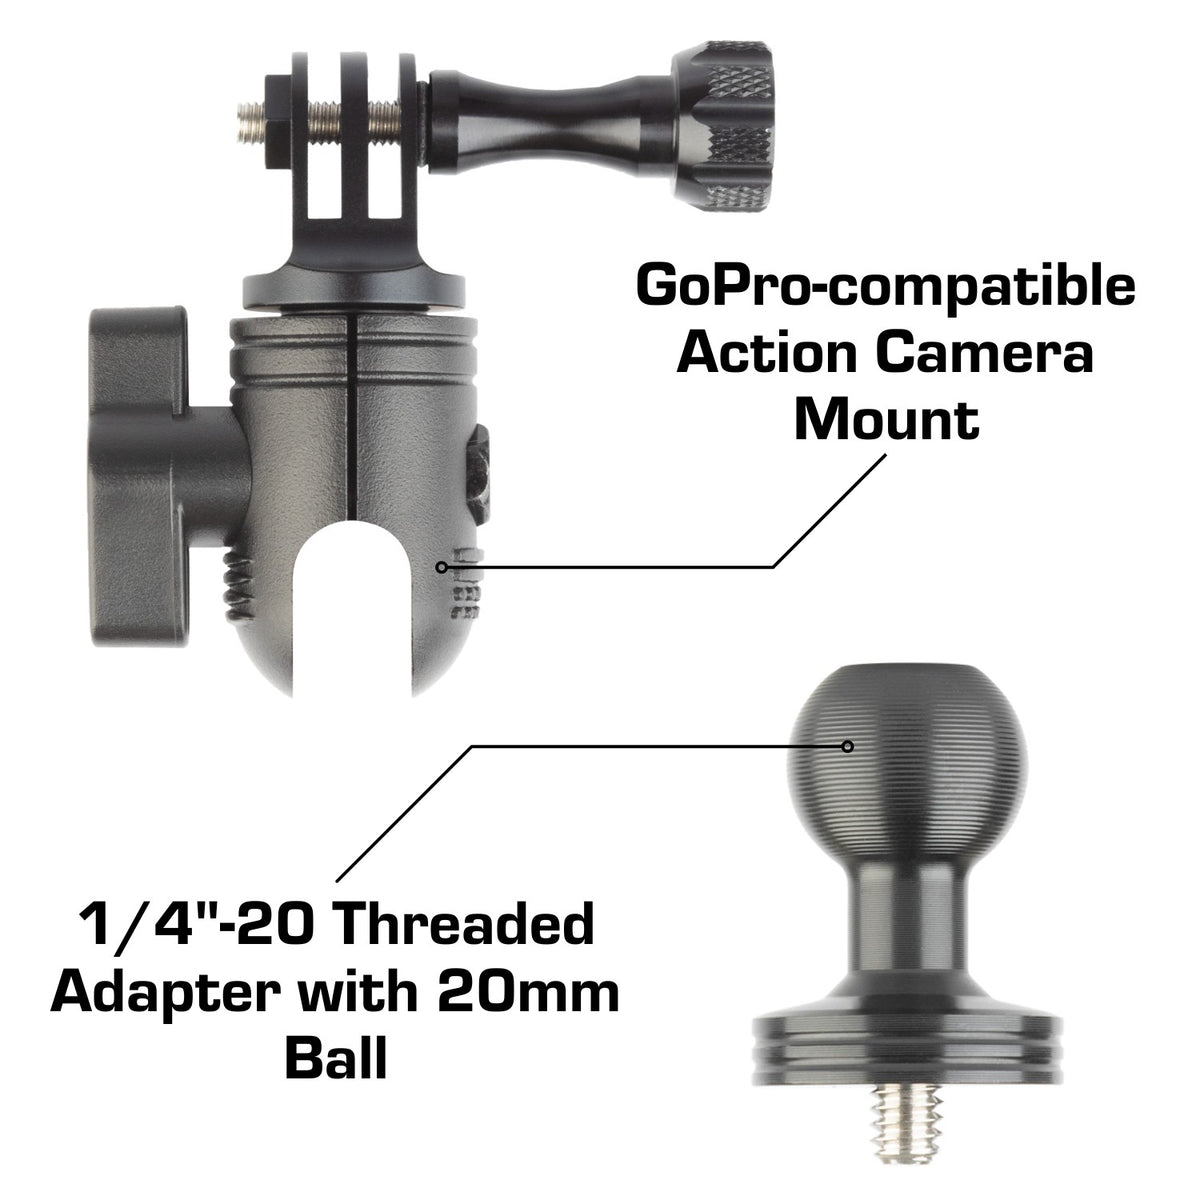 Wet Boltuniversal 1 Ball Head Adapter For Ram Mounts - Compatible With  Gopro, Dji, Sony, Nikon